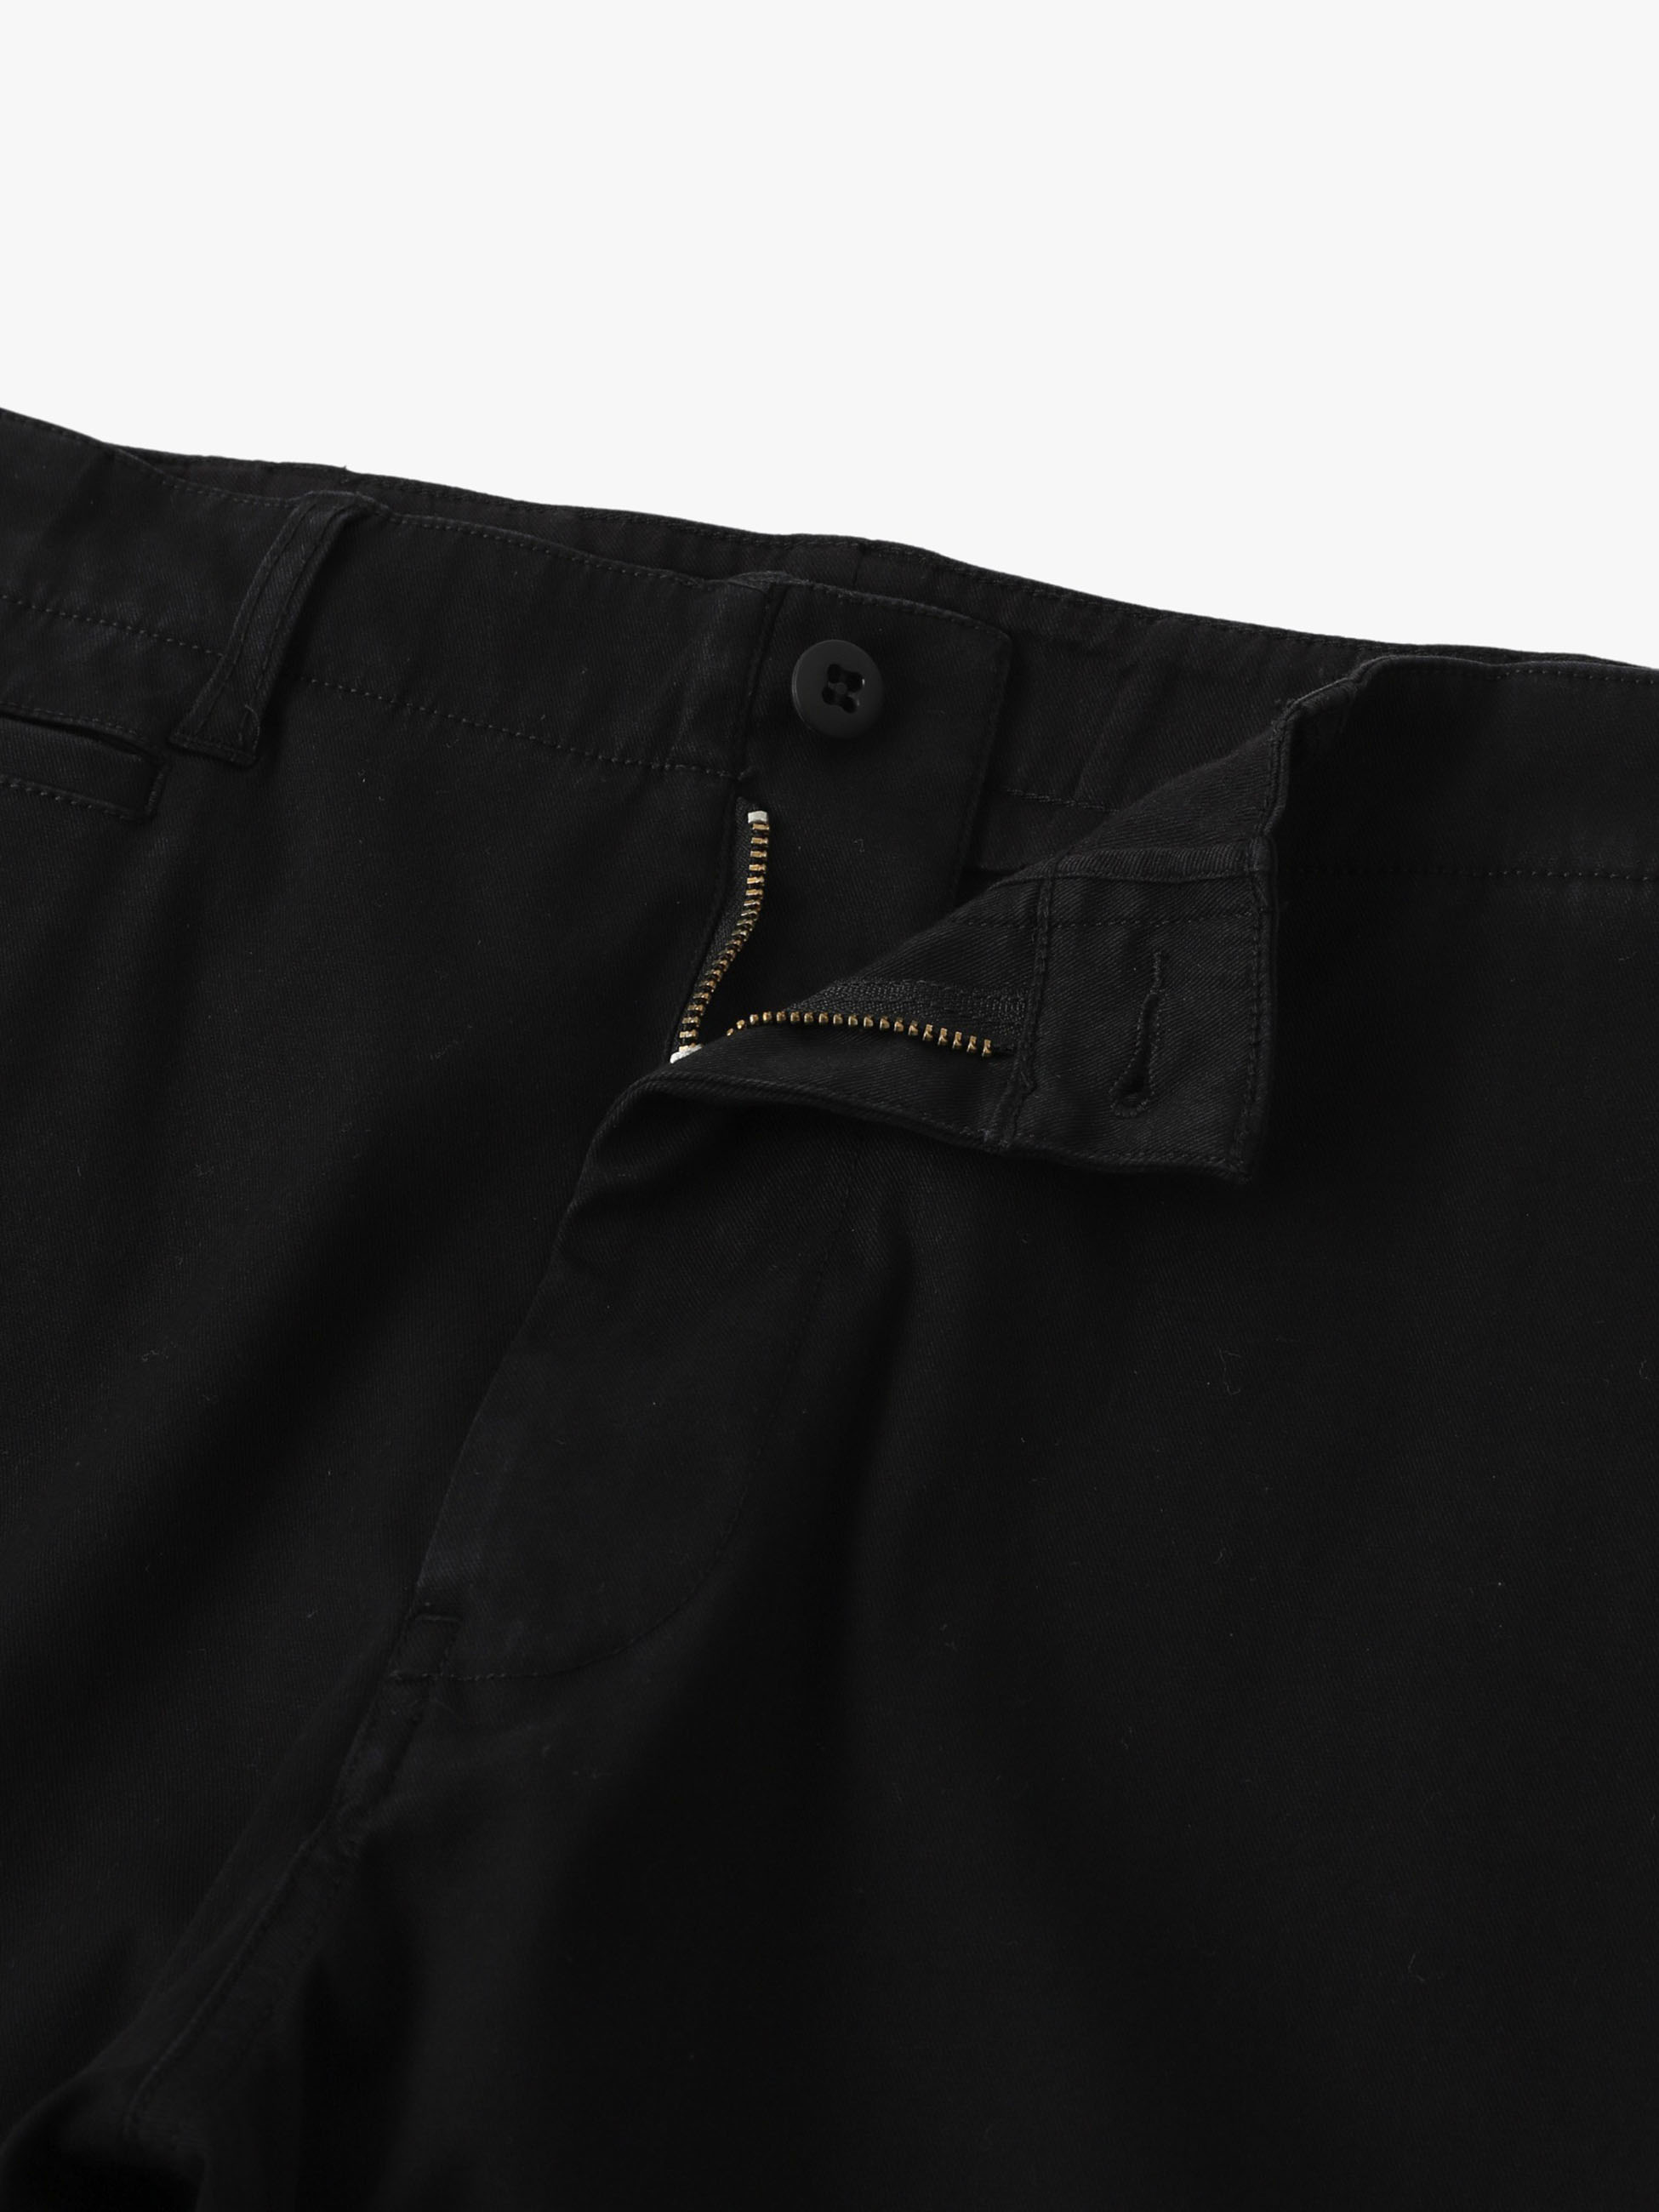 Stretch Slim Tapered Fit Pants｜Ron Herman(ロンハーマン)｜Ron Herman